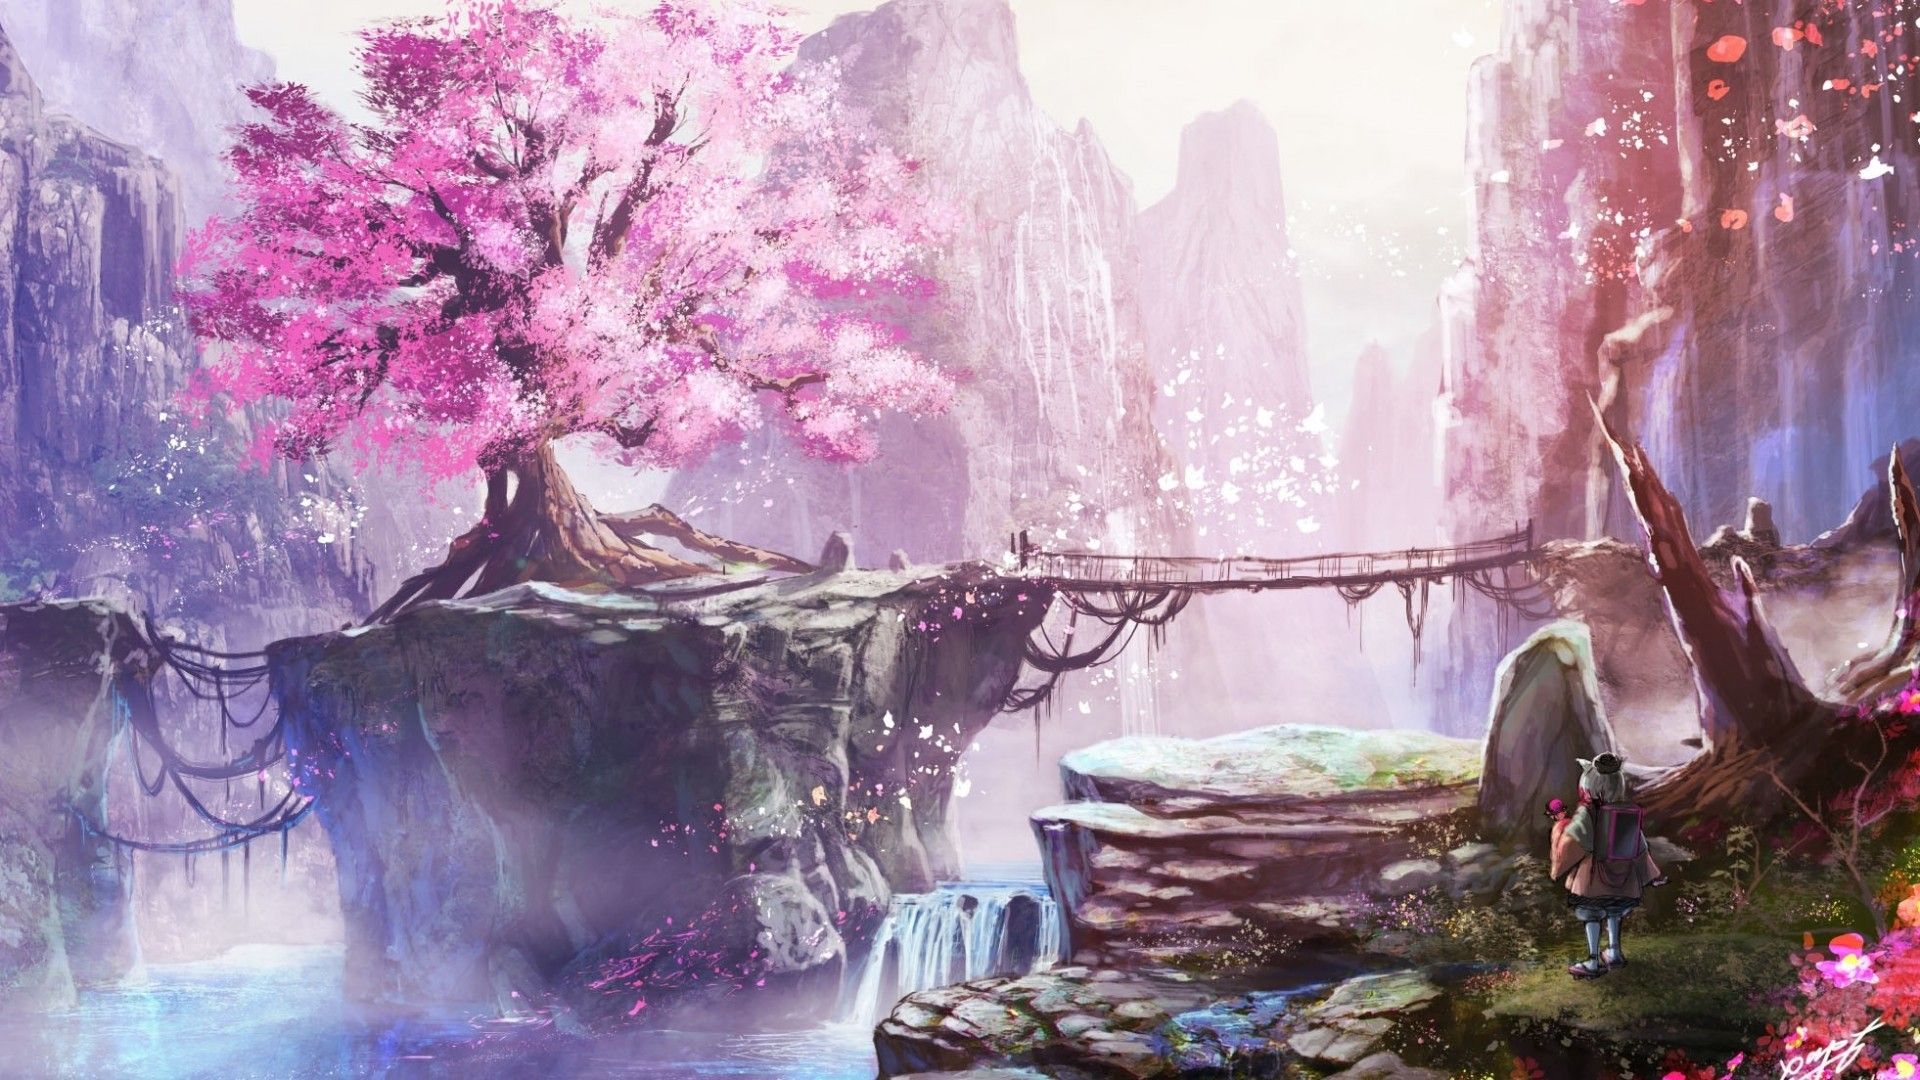 Download 1920x1080 Anime Landscape, Cherry Blossom, Bridge, Waterfall, Anime Girl, Nature Wallpaper for Widescreen